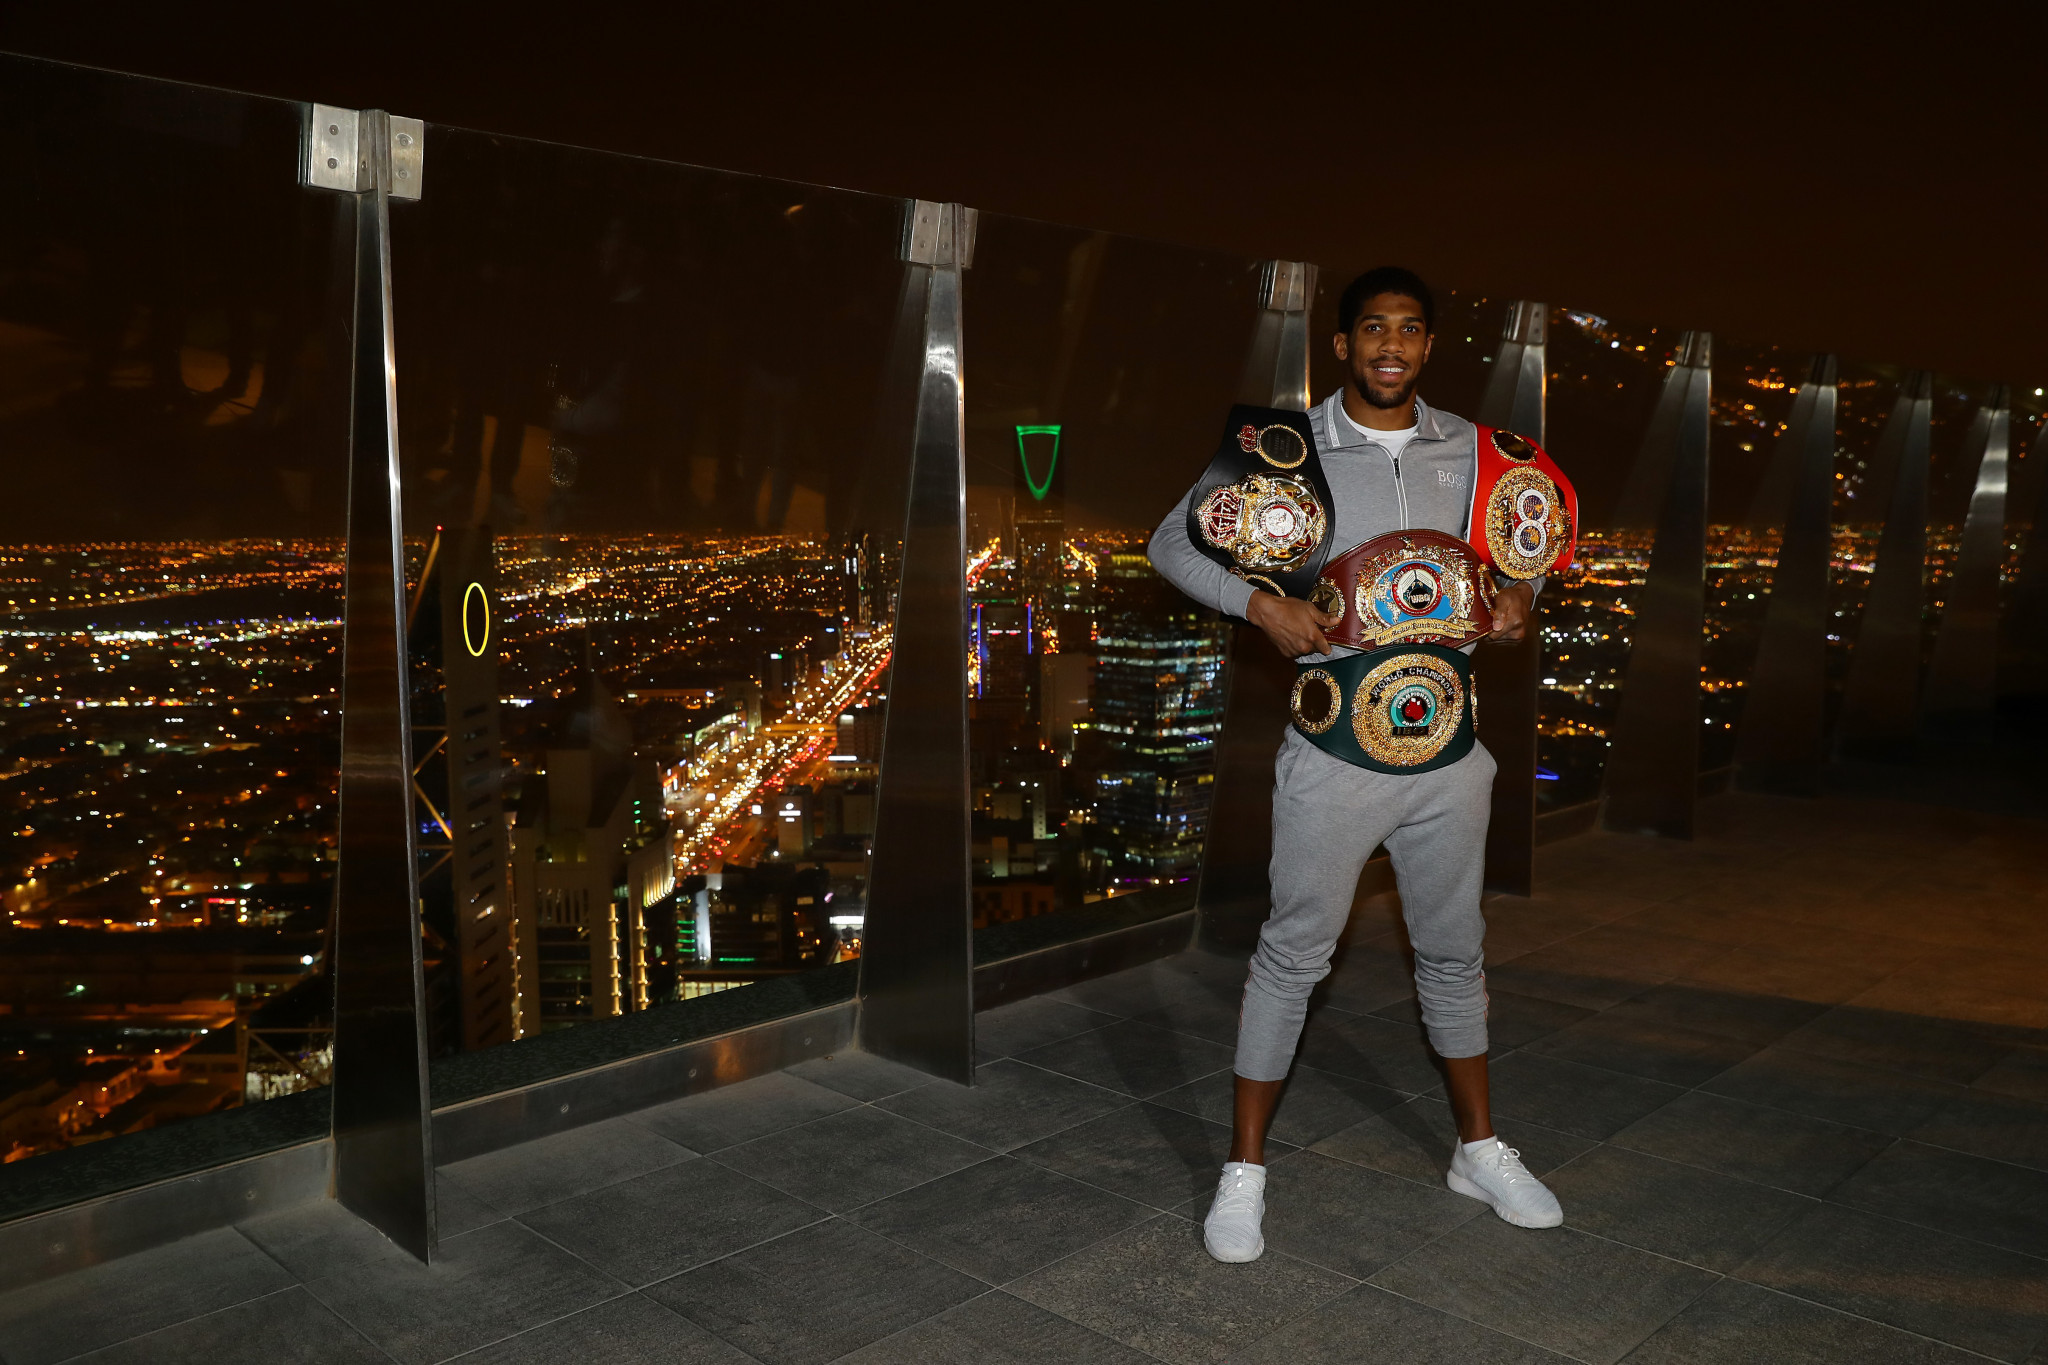 British boxer Anthony Joshua took part in a controversial fight in Saudi Arabia ©Getty Images